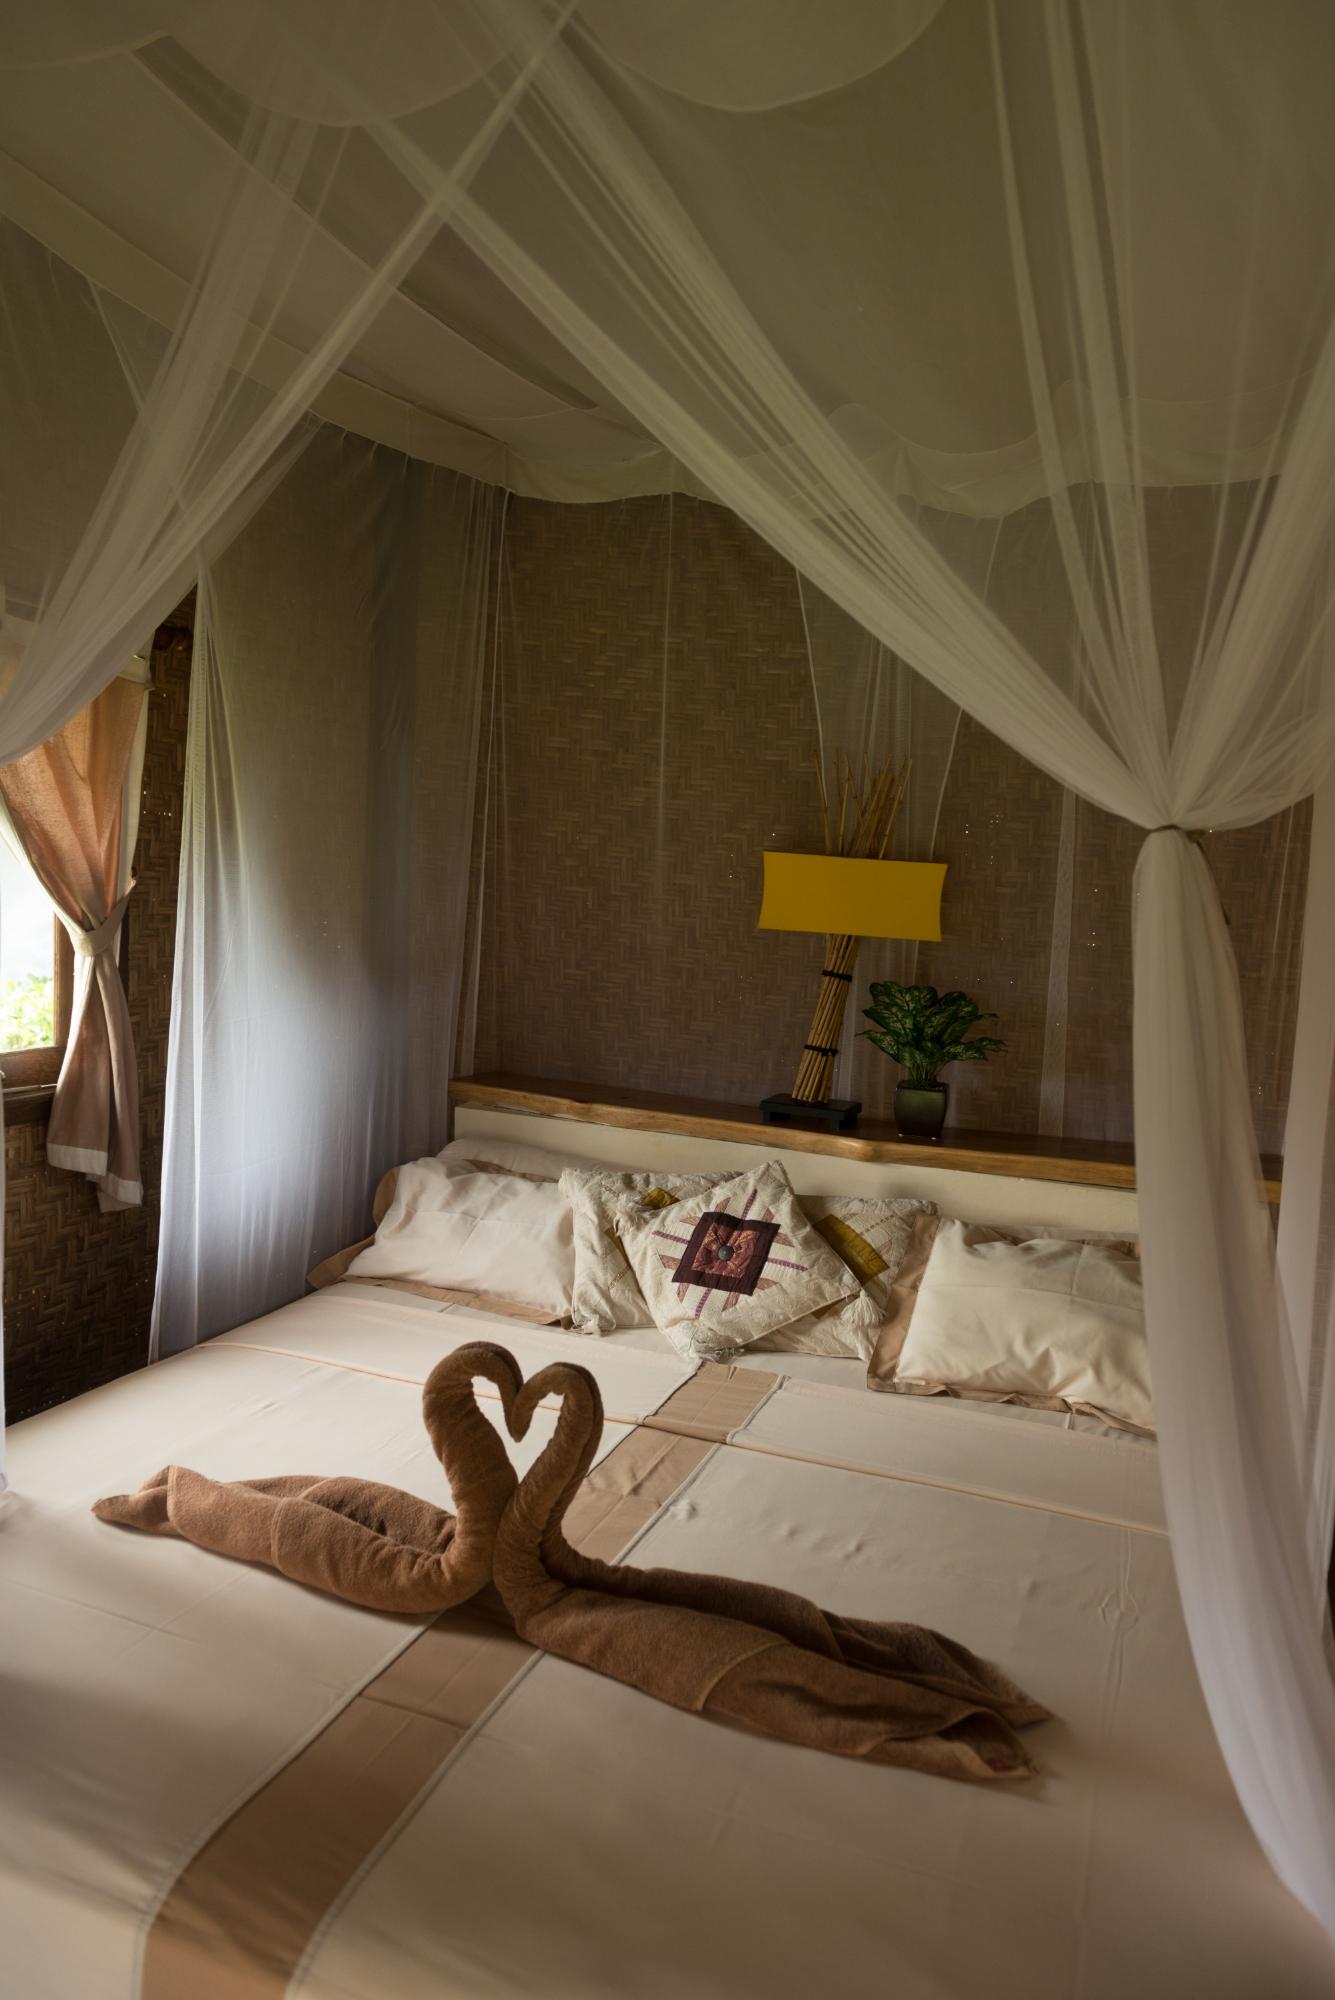 Image the Cosy Feeling of Curling Up on This Mosquito Net Covered Bed After a Long Day of Holiday fun 